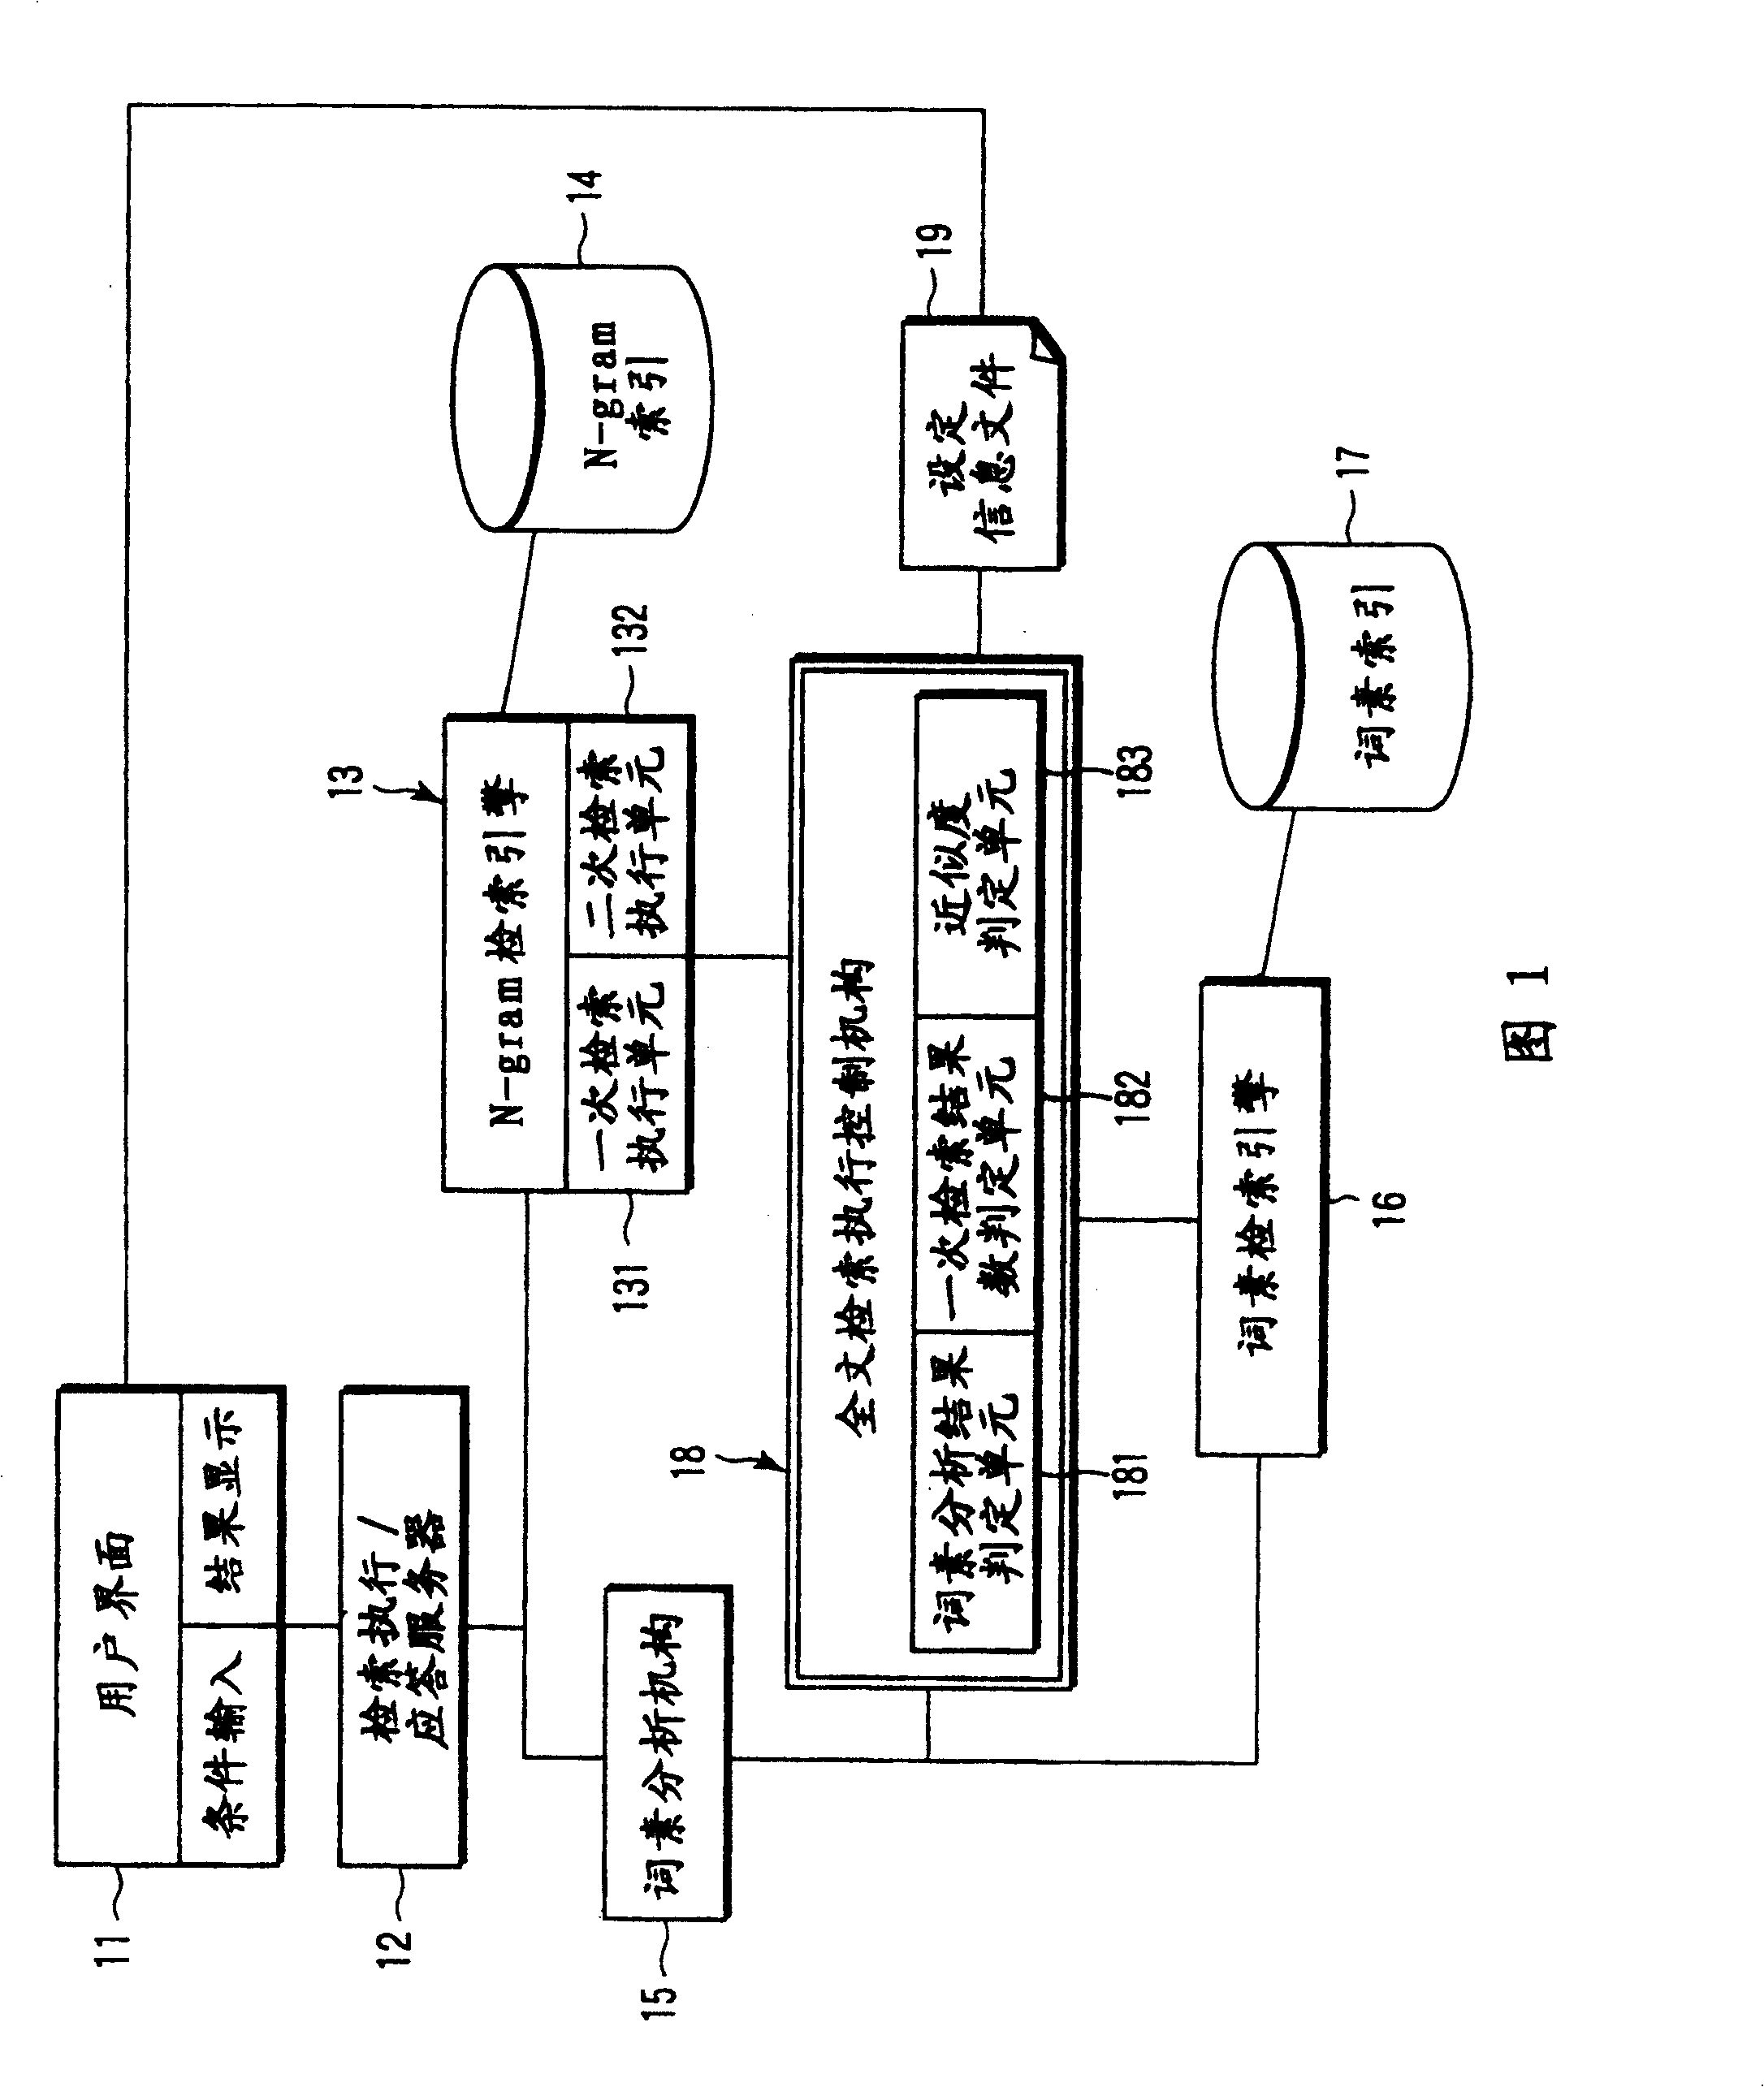 Full-text retrieval system and method